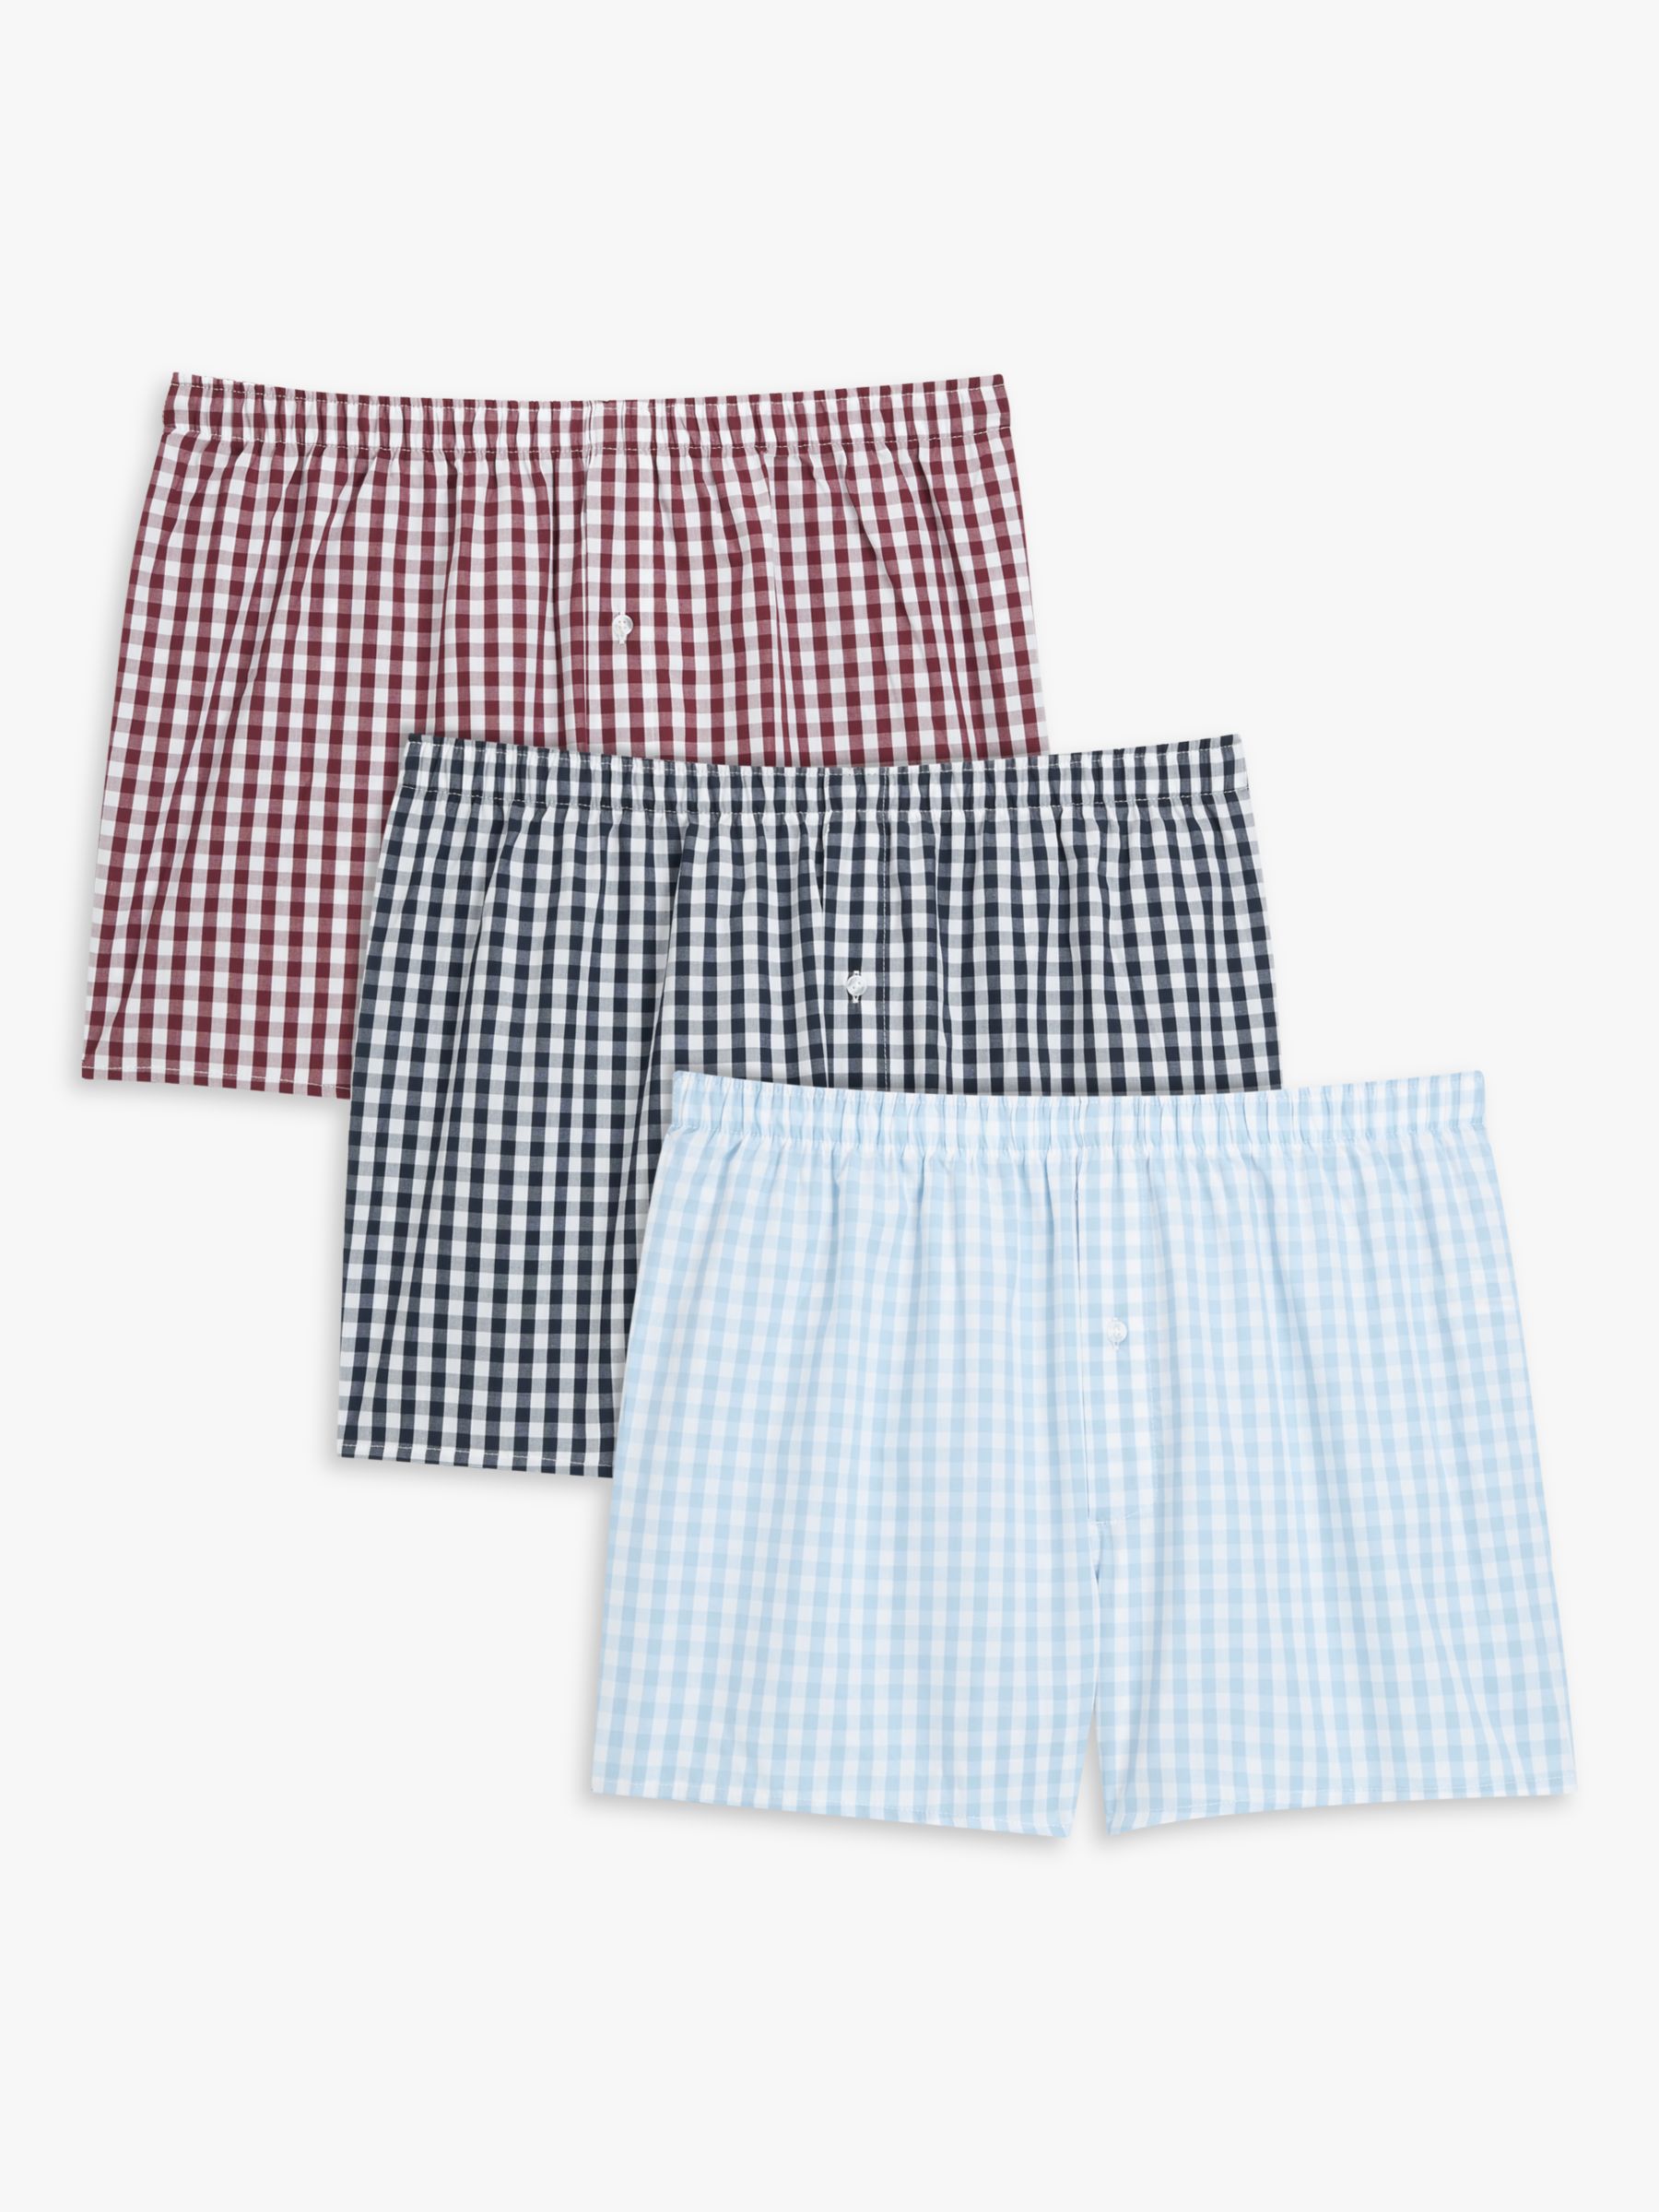 John Lewis Organic Cotton Gingham Check Boxers, Pack of 3, Gingham, XL